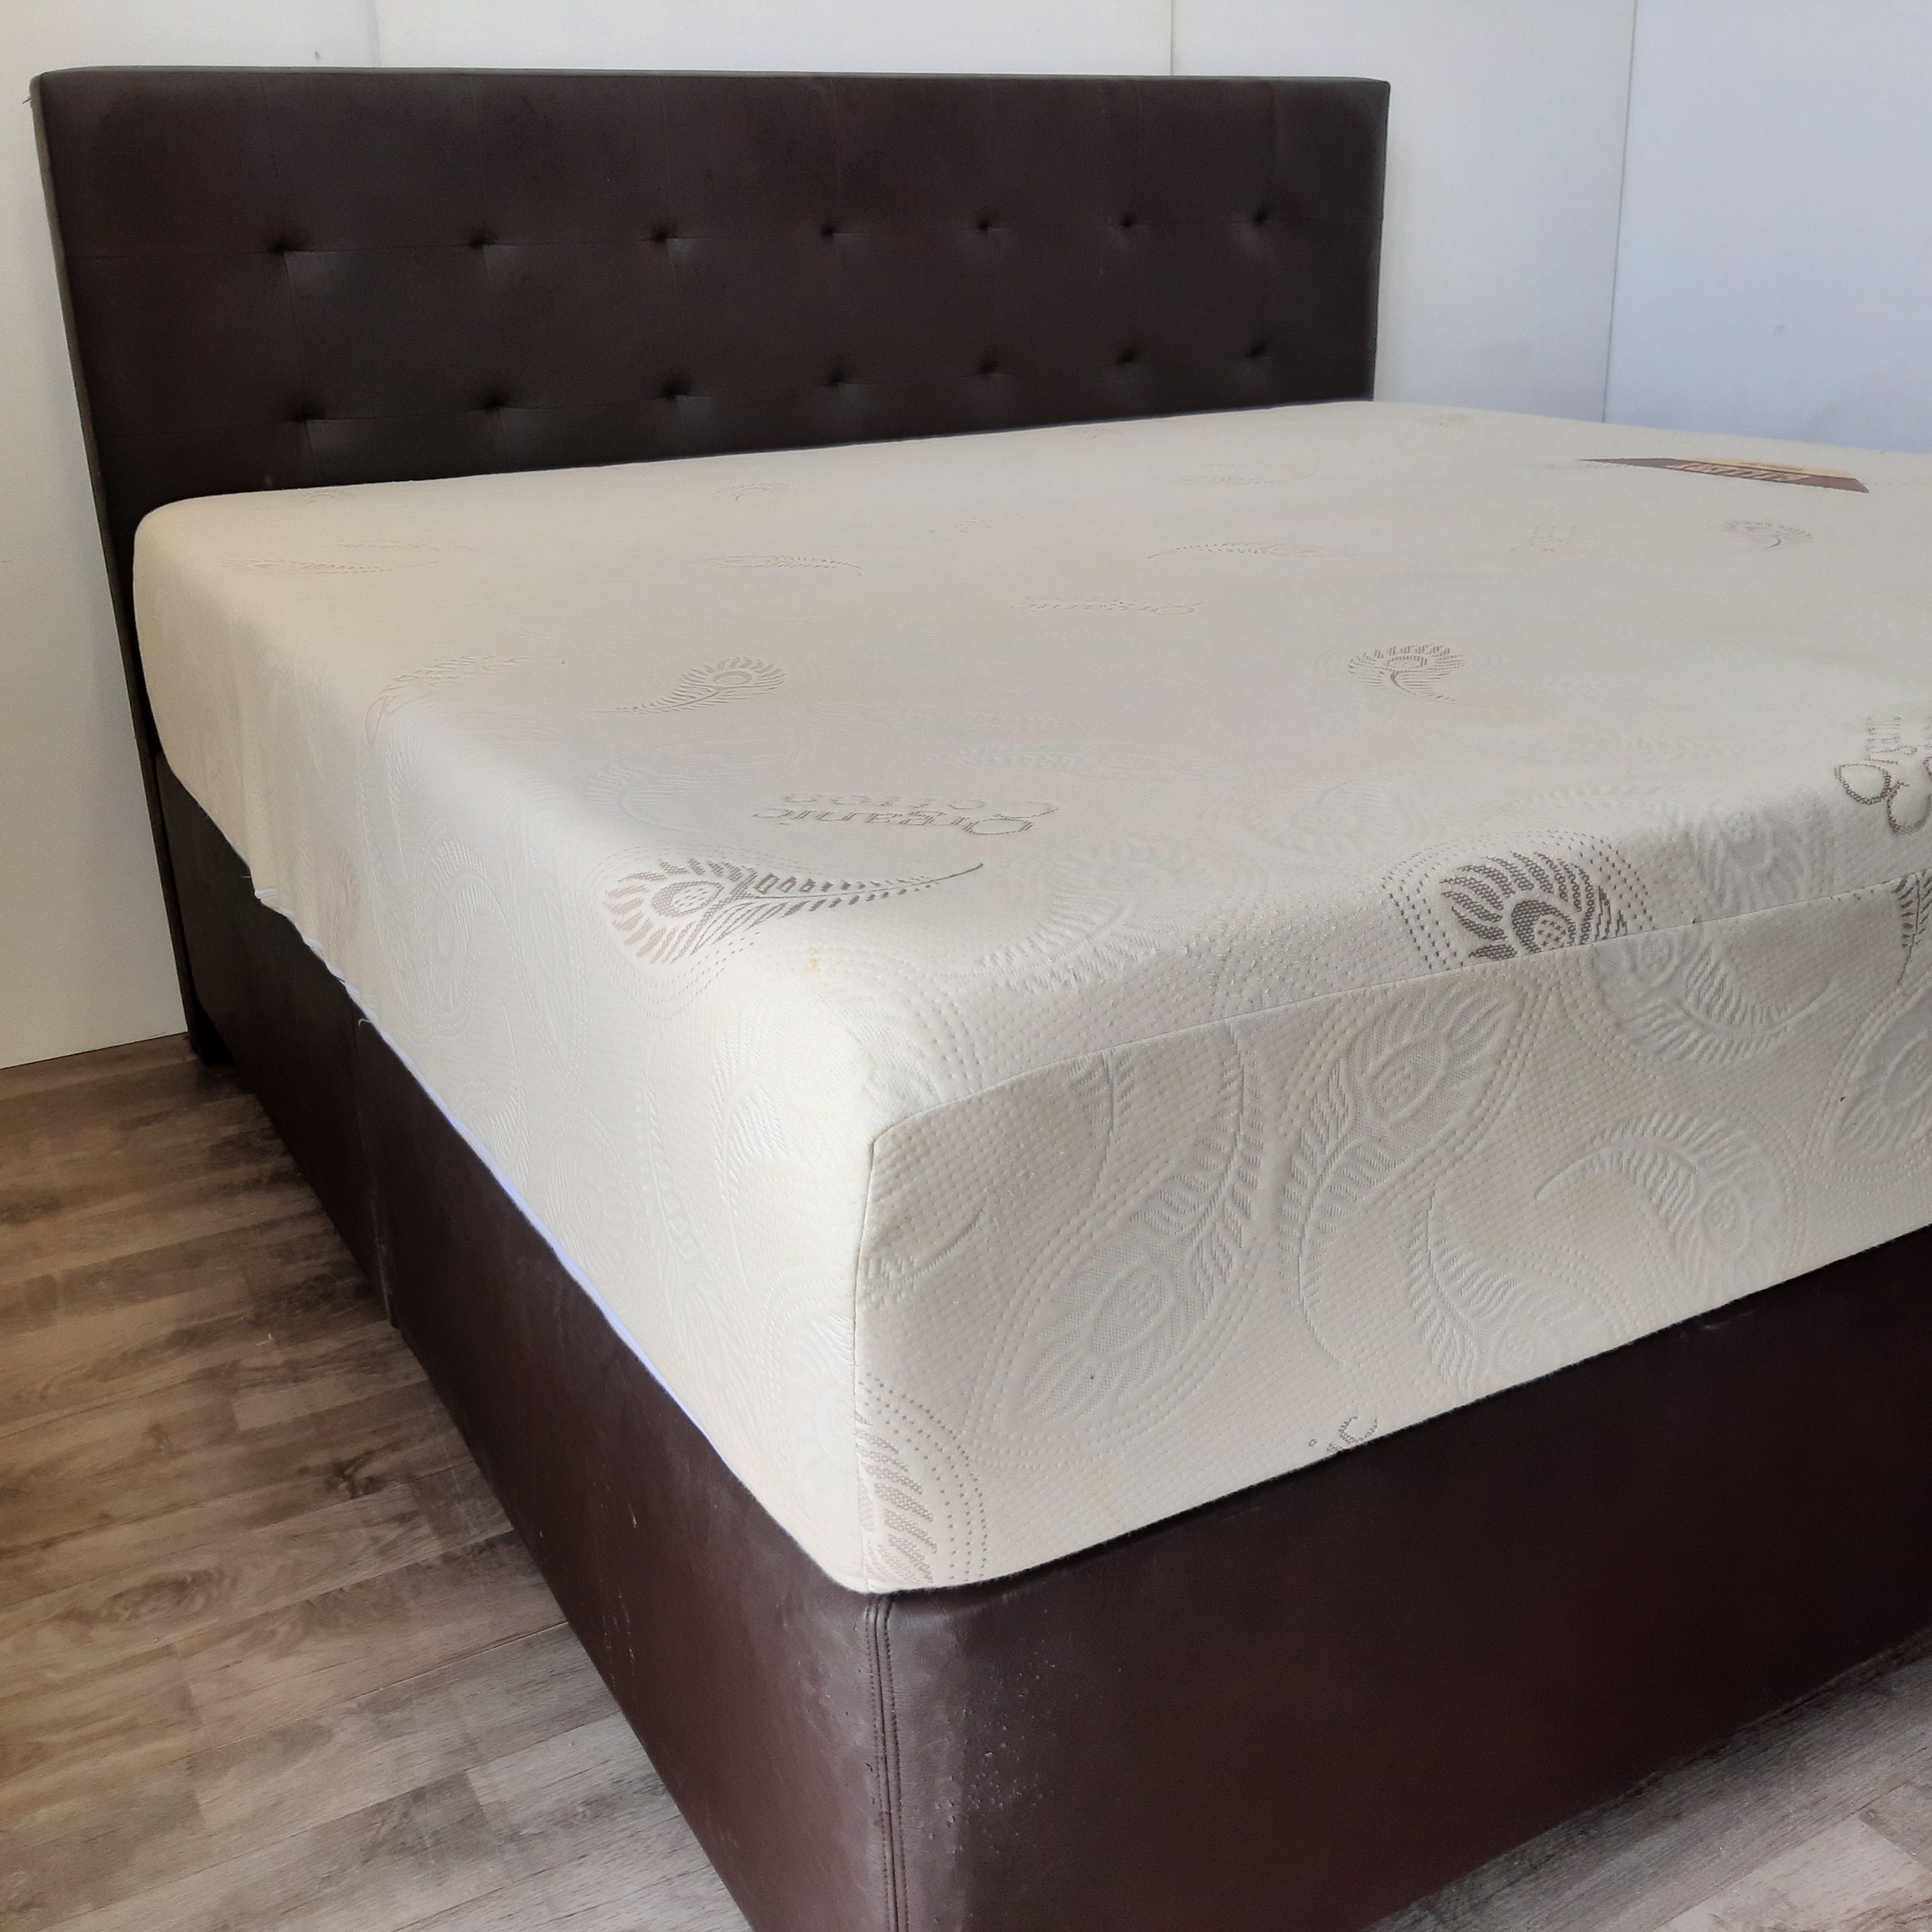 Used Furniture Sale Premier Furniture / Super King Size Bed with Mattress / Brown